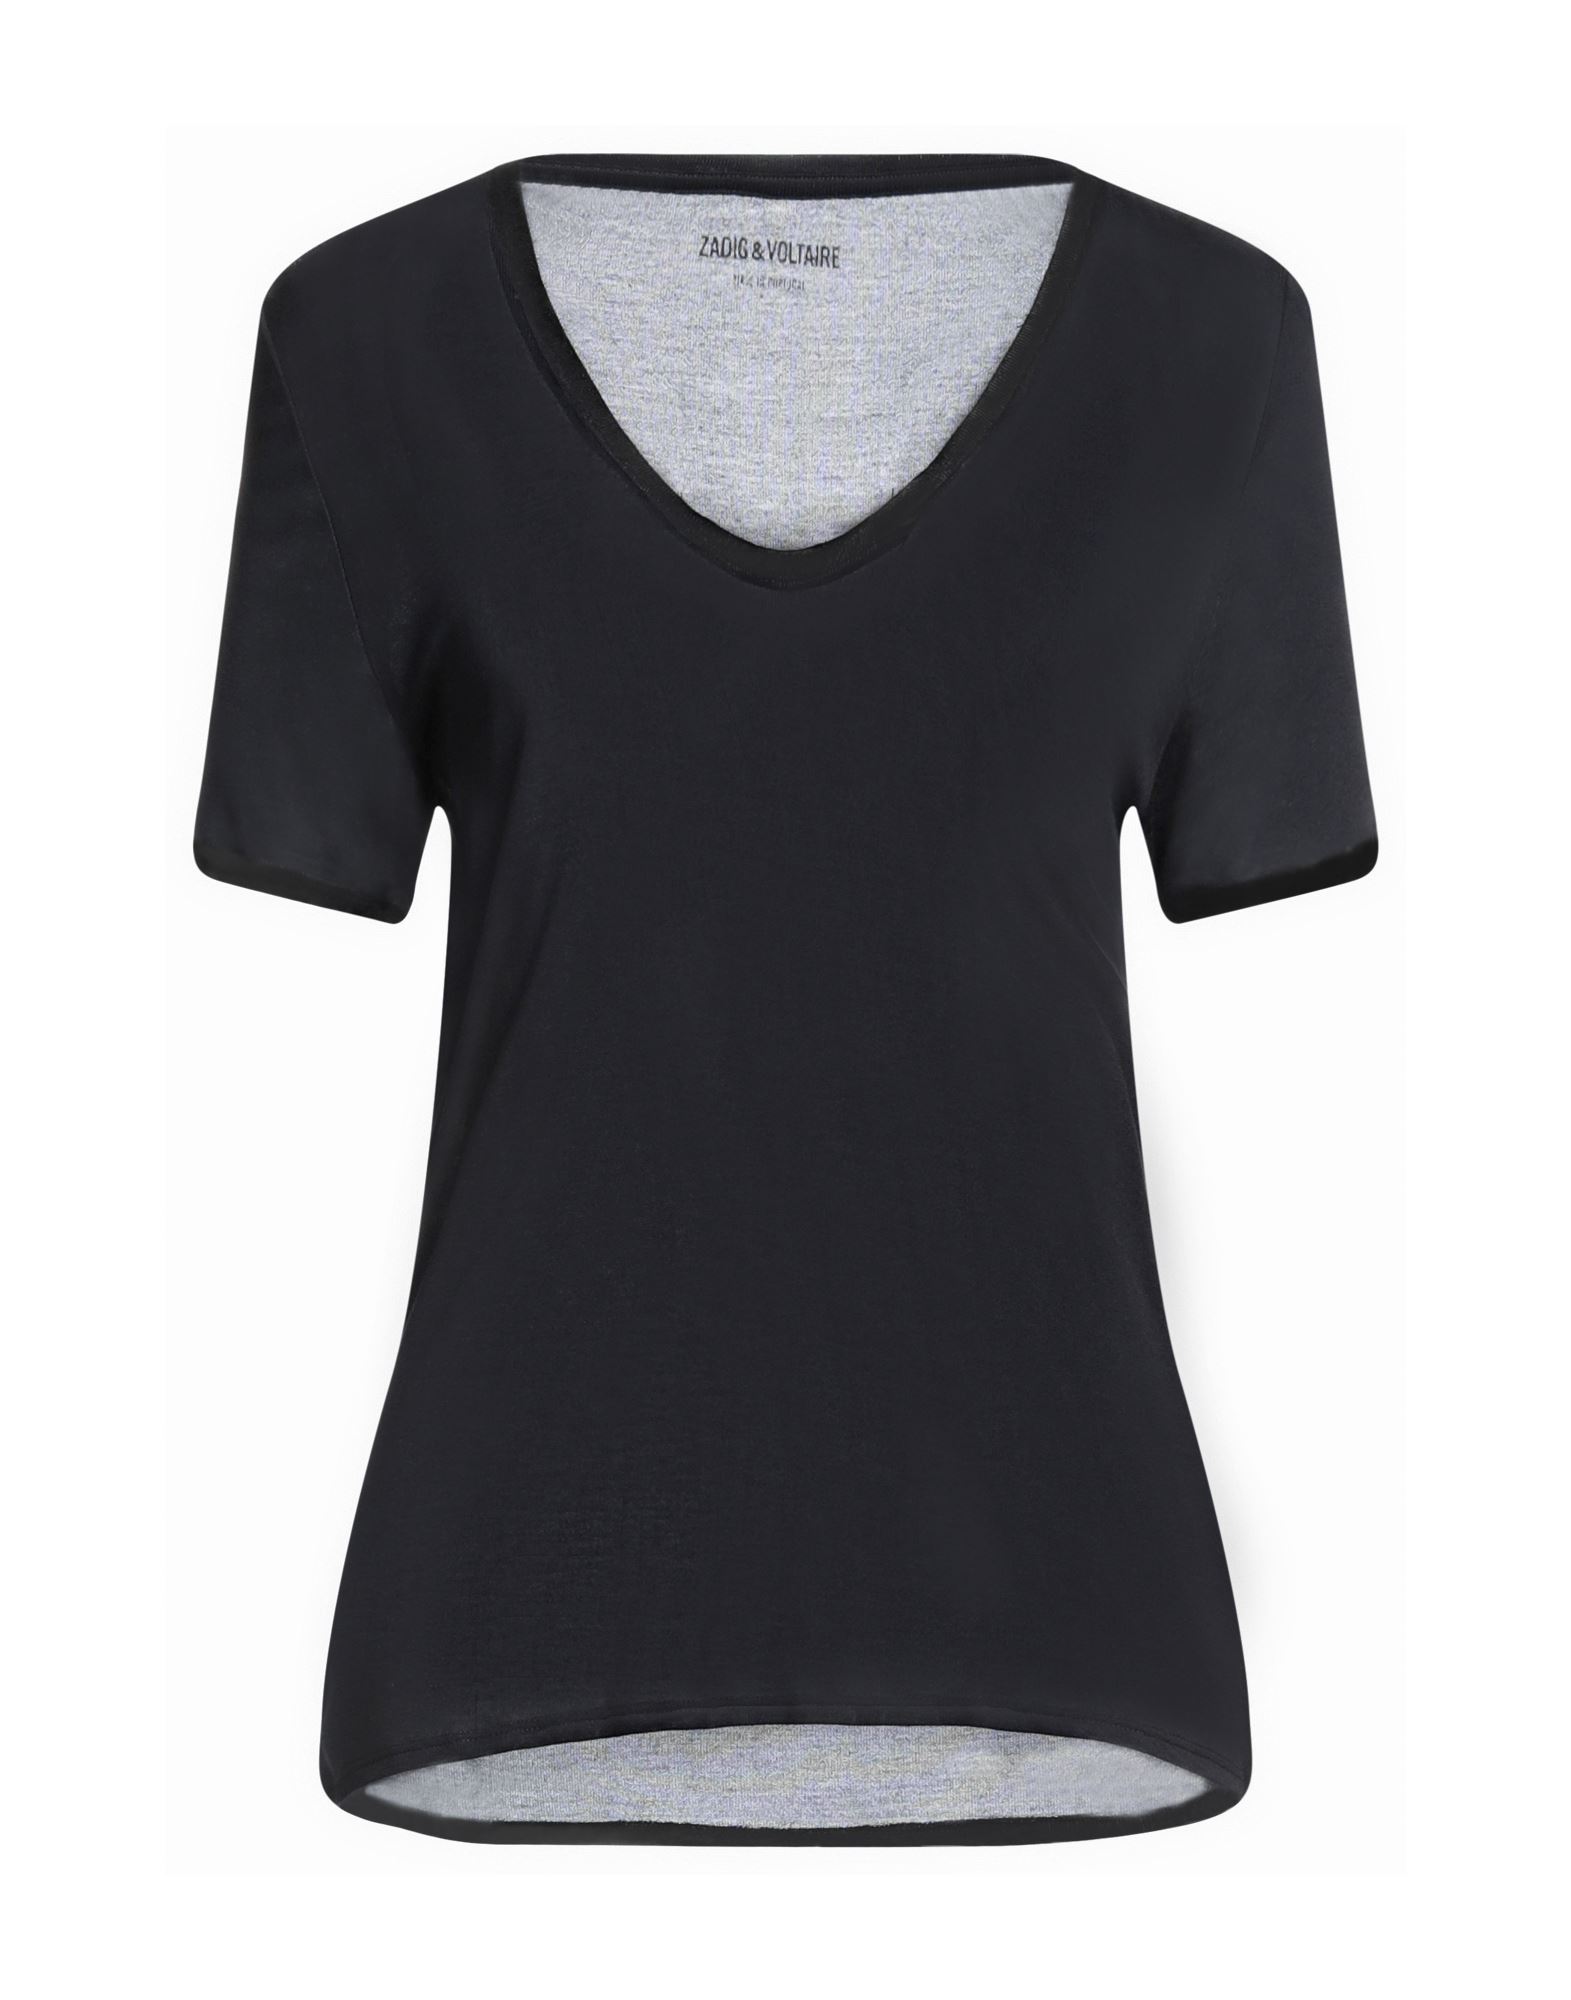 ZADIG & VOLTAIRE ZADIG & VOLTAIRE WOMAN T-SHIRT MIDNIGHT BLUE SIZE M MODAL